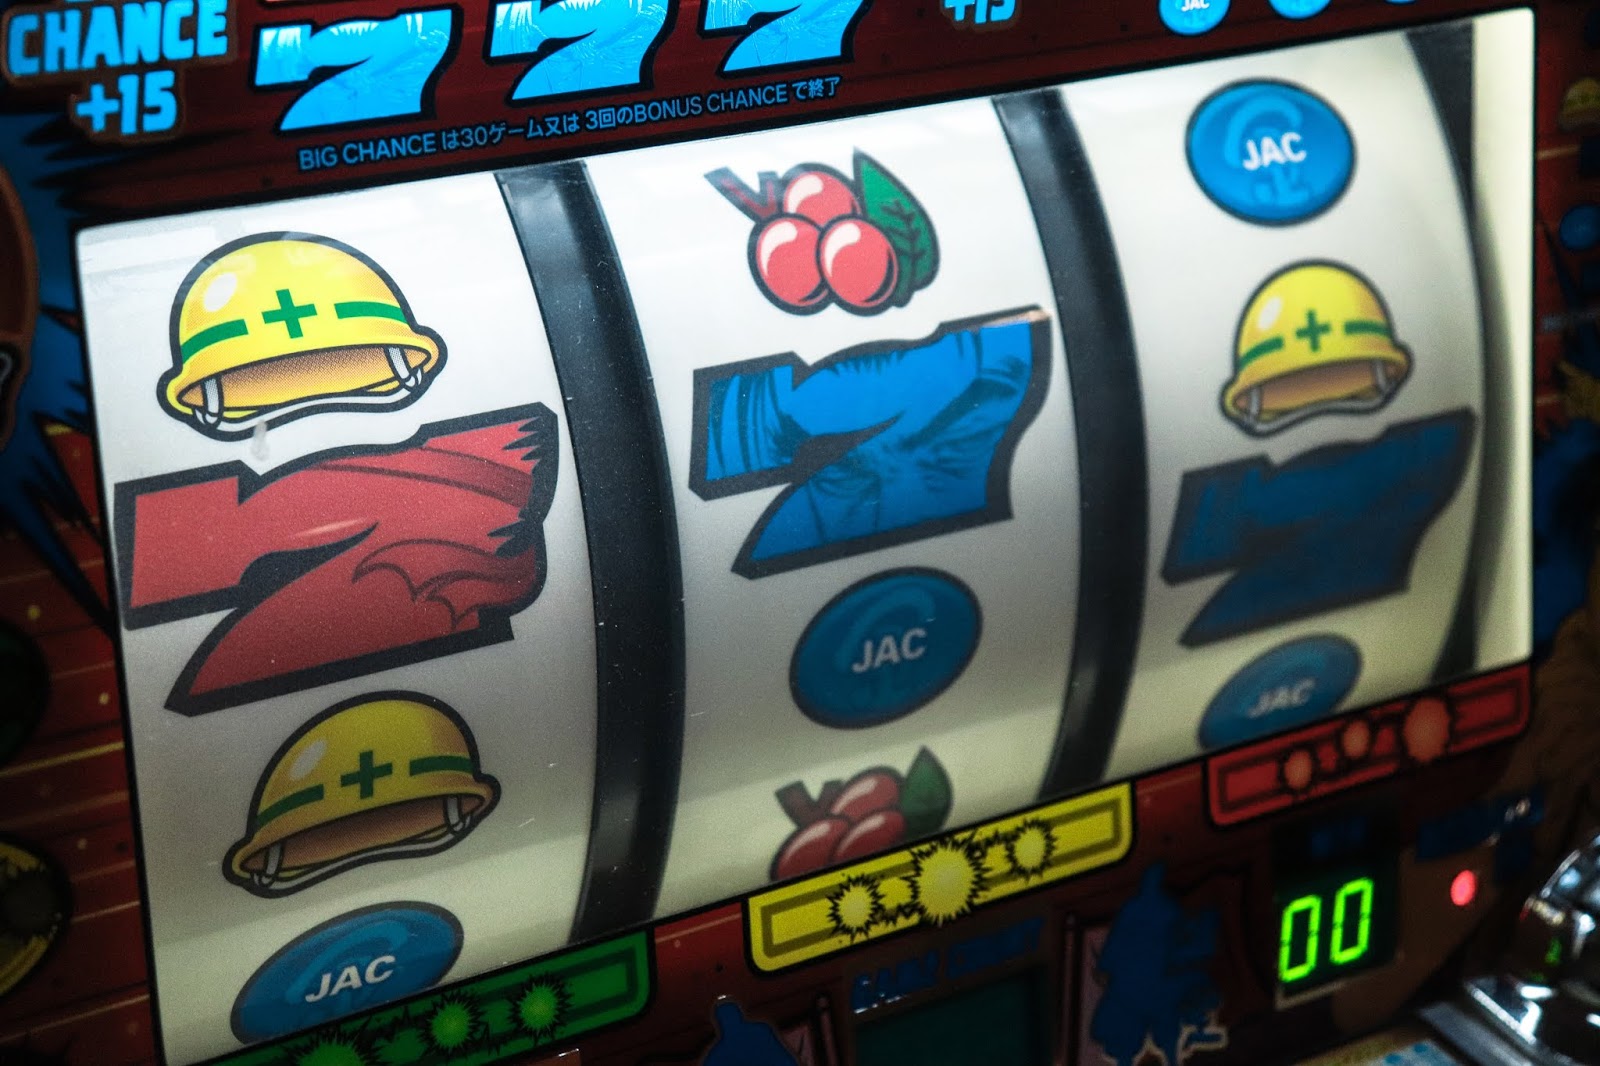 Best Slots To Play